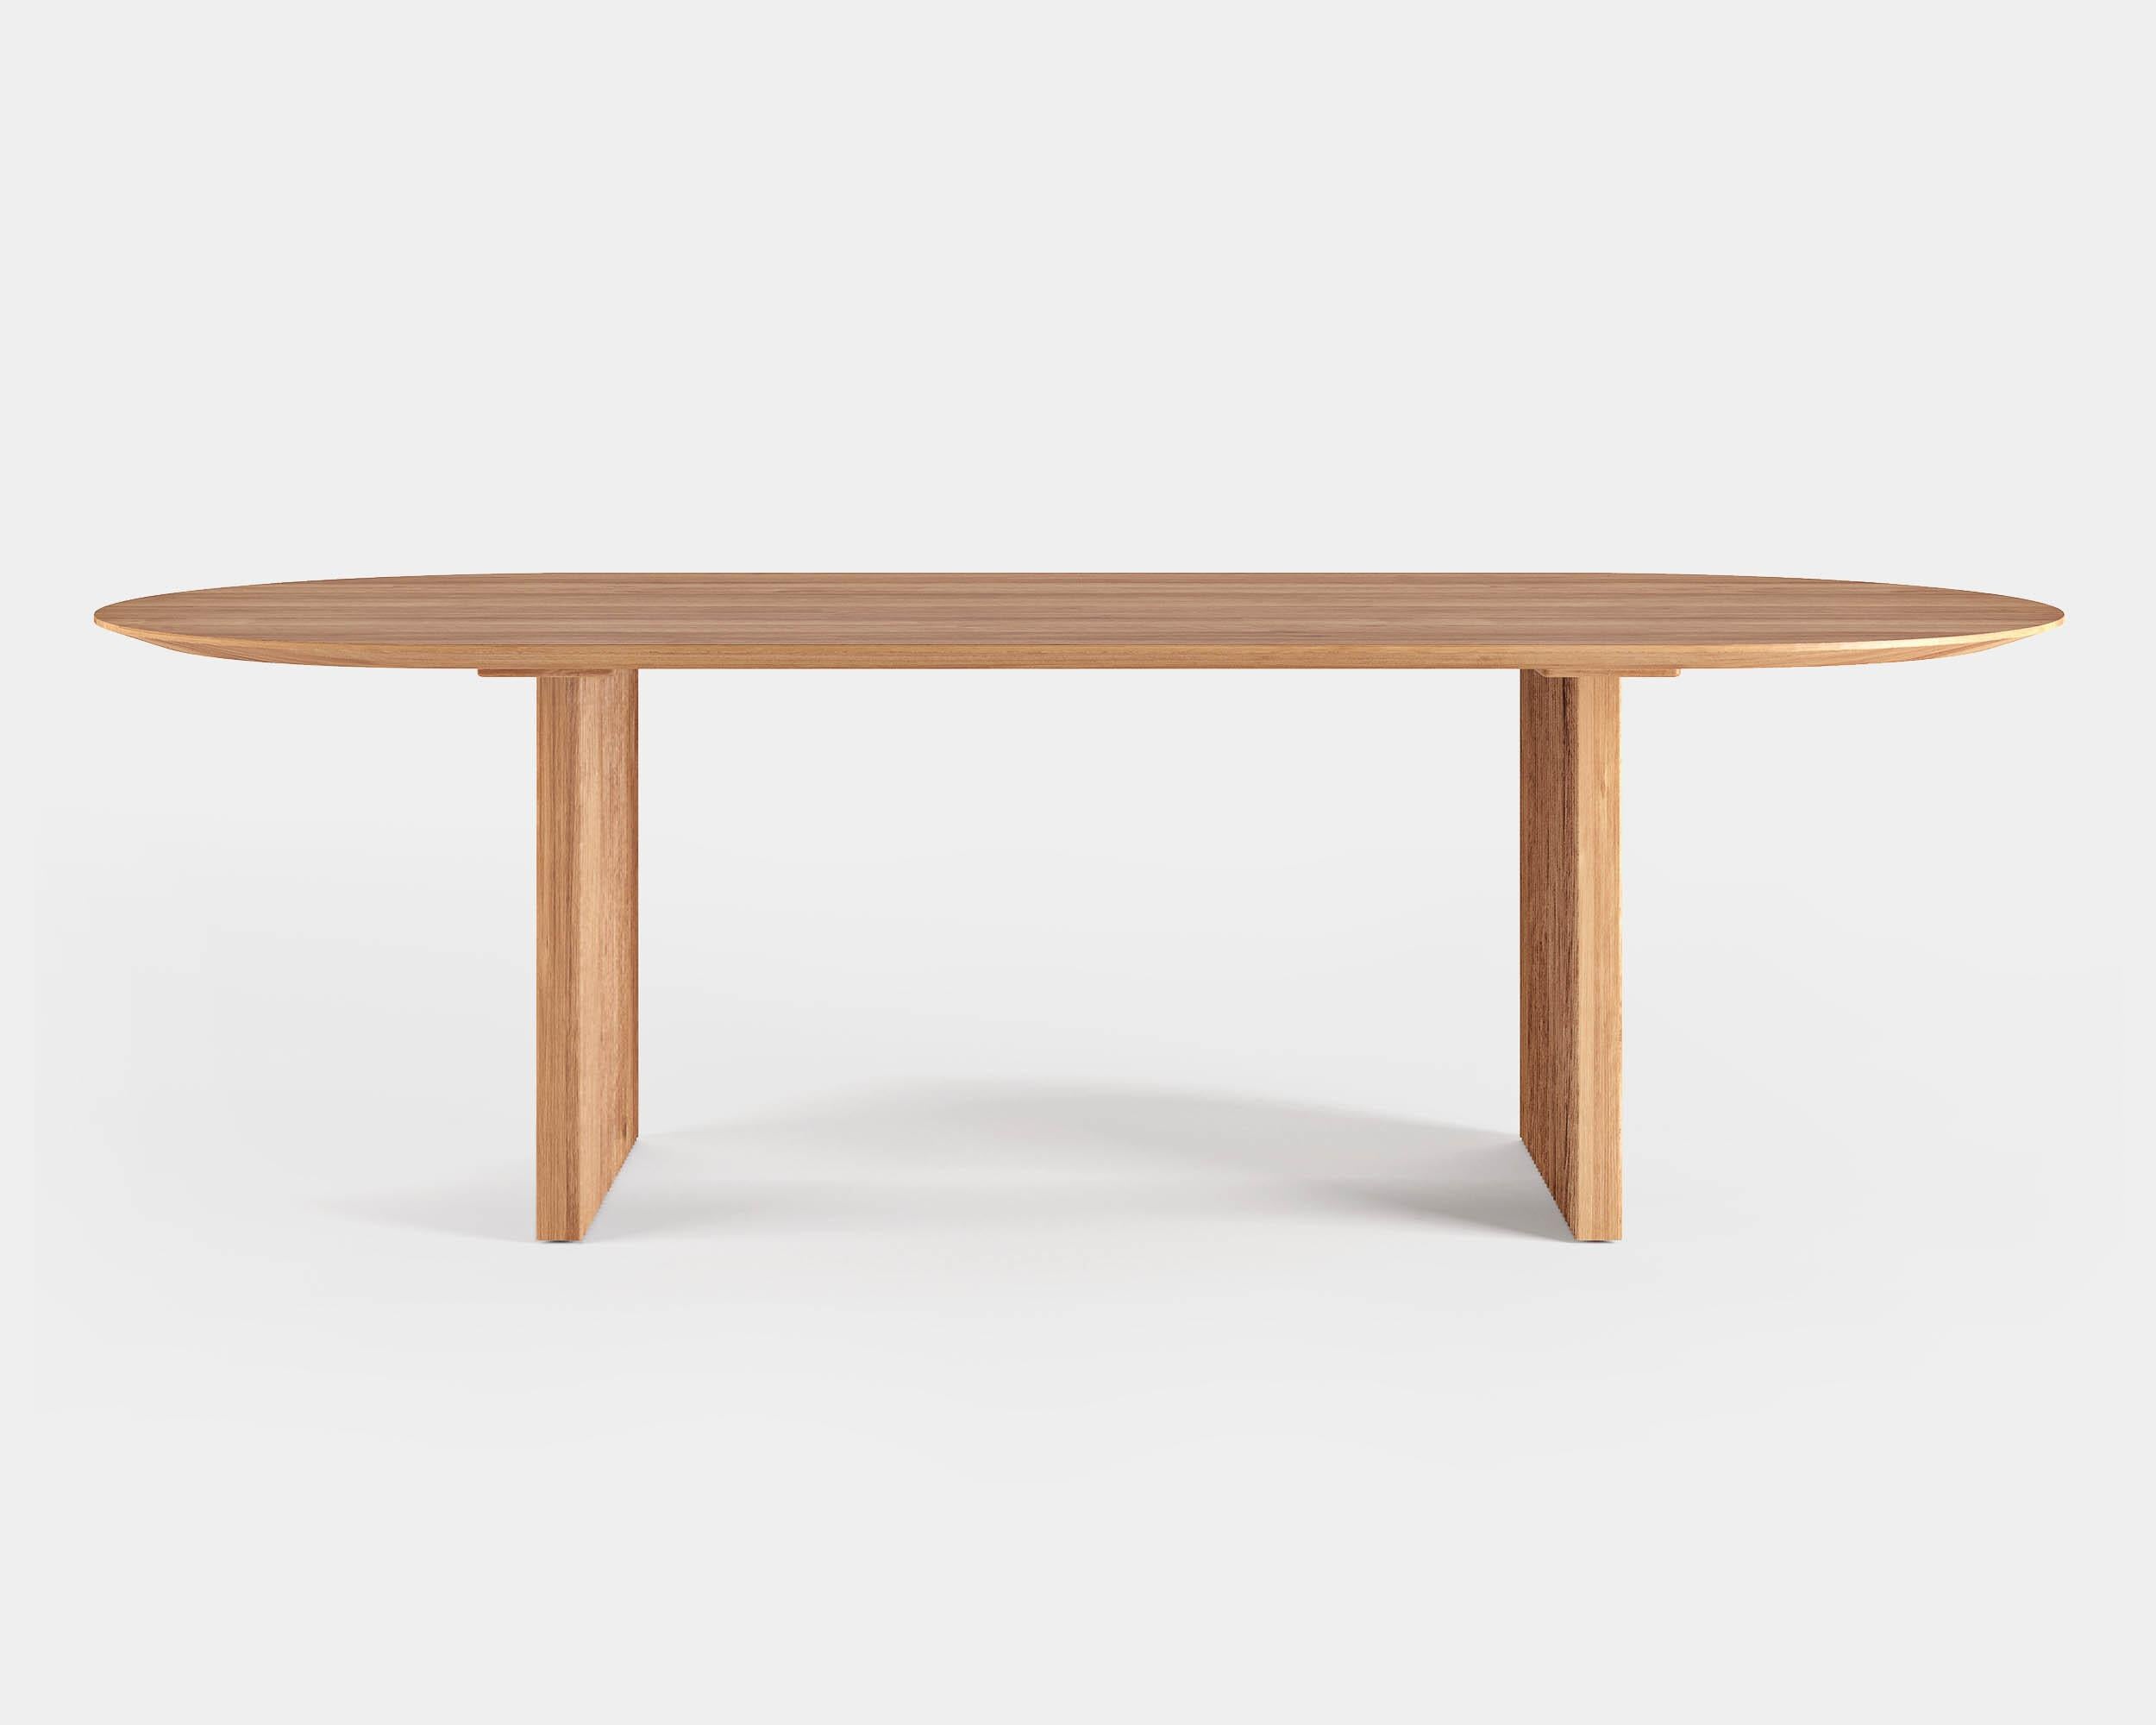 Ten dining table, oval, 340 cm.
Solid wood table top and legs. Handmade in Denmark. 

Measures: height: 72 or 74 cm.

Table top dimensions:
– 200 x 95 cm
– 240 x 105 cm
– 270 x 105 cm
– 300 x 105 cm
– 340 x 105 cm
– 370 x 105 cm
– 400 x